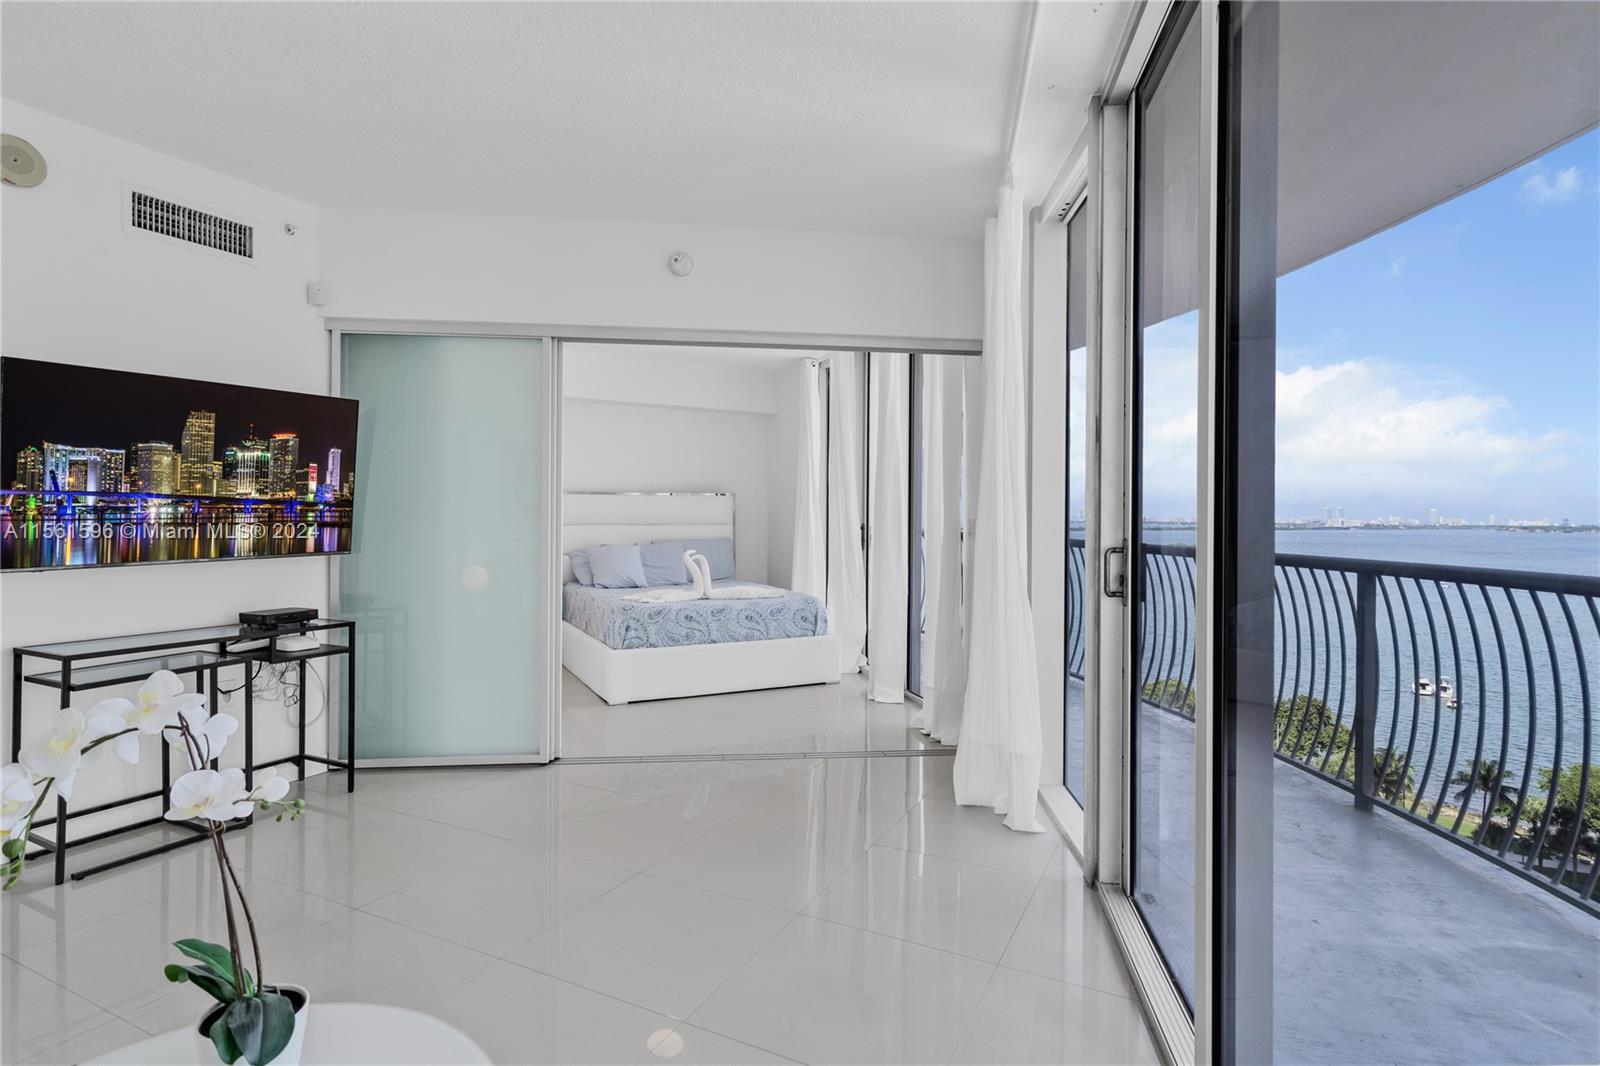 Don't miss this opportunity to lease this impeccable furnished 2bed/2bath. Renovated to meet the highest standards of luxury & comfort with unobstructed water views. High-end finishes throughout, including porcelain floors, stainless steel appliances & quartz countertops. Enjoy the beauty of Biscayne Bay from your private balcony, watch boats go by & soak up the sun. The perfect place to unwind after a long day or to entertain friends & family. If you're looking for a place to call home in Miami, there's no better location. This vibrant neighborhood has everything you need to live the luxurious lifestyle you deserve. Perfect for anyone who wants to be close to all that the city has to offer, Miami's best restaurants, shops & entertainment venues. Pool closed due to repairs.